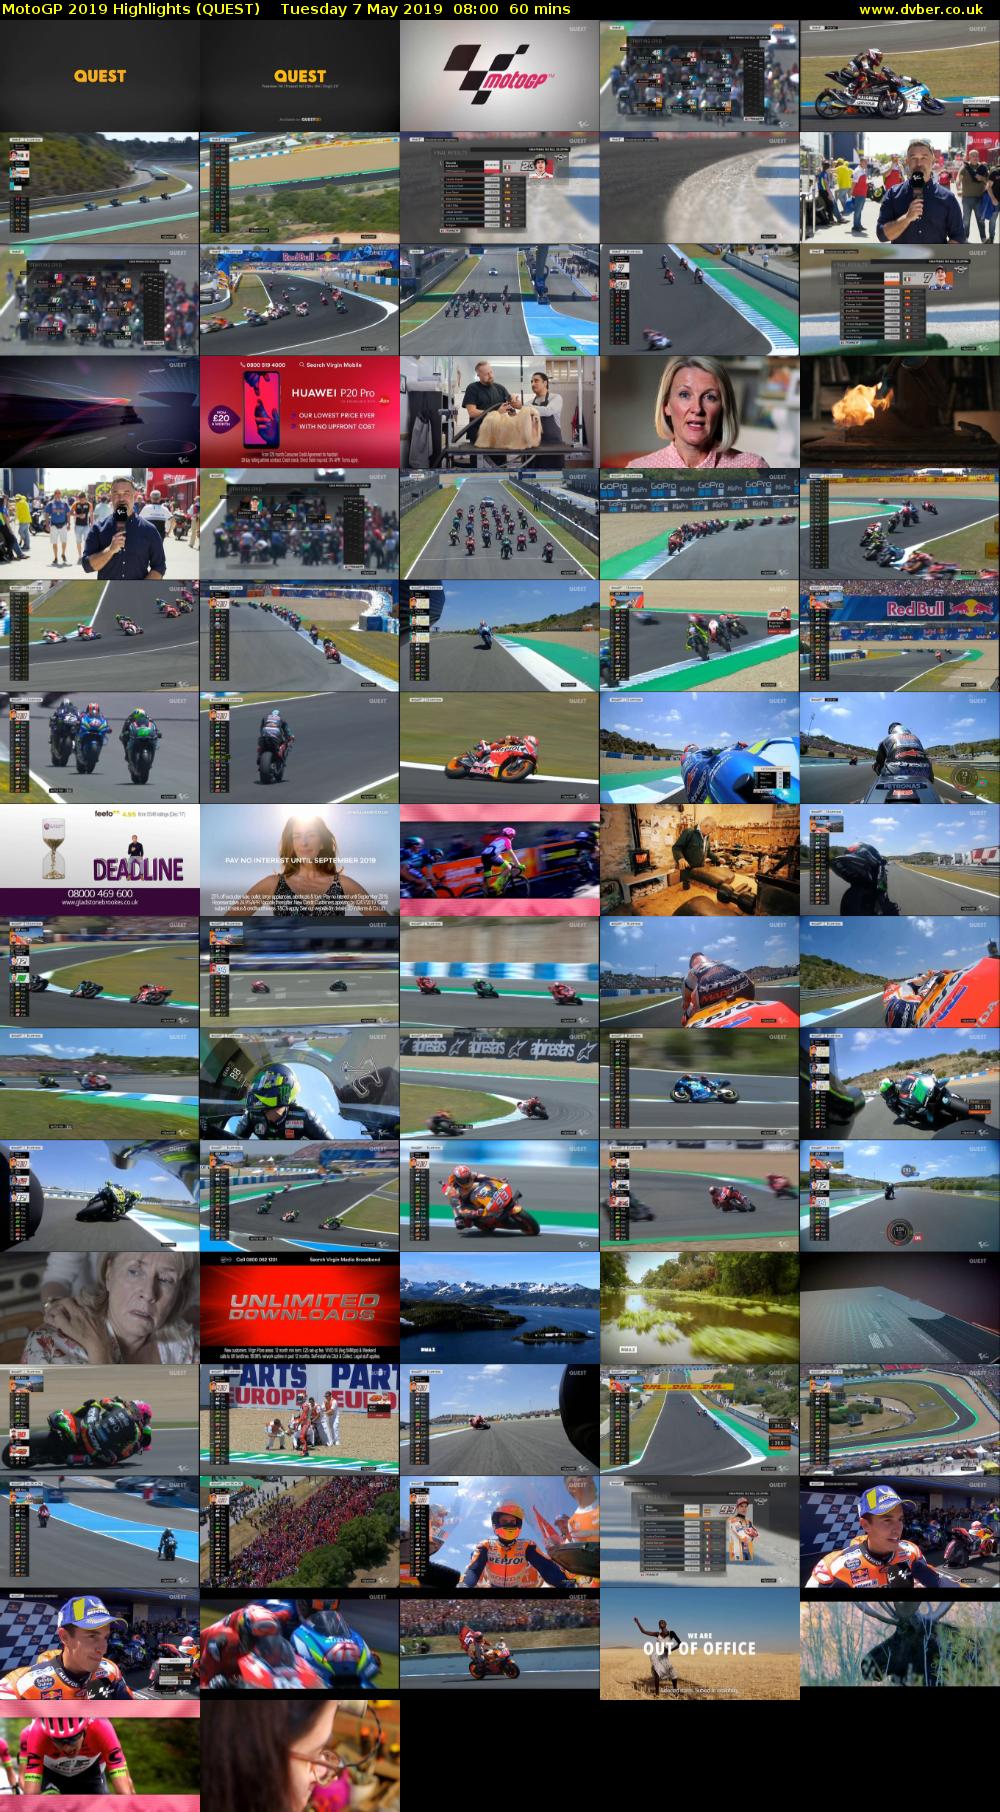 MotoGP 2019 Highlights (QUEST) Tuesday 7 May 2019 08:00 - 09:00